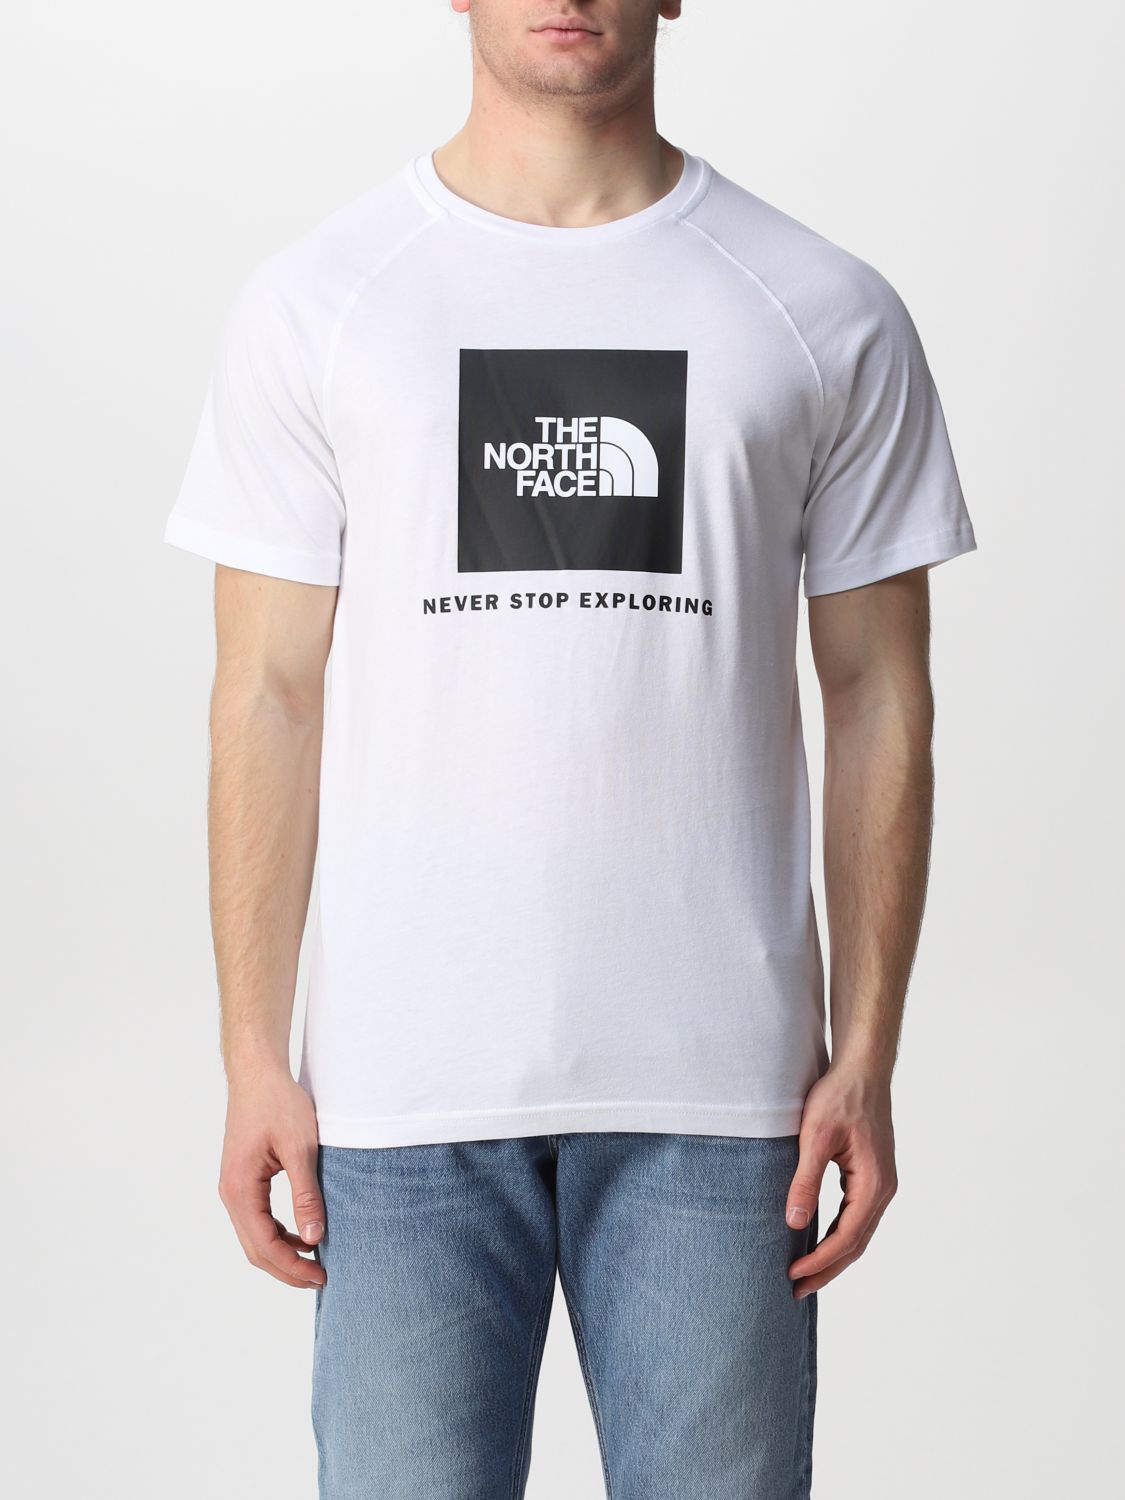 THE NORTH FACE: T-shirt with logo - White | The North Face t-shirt ...